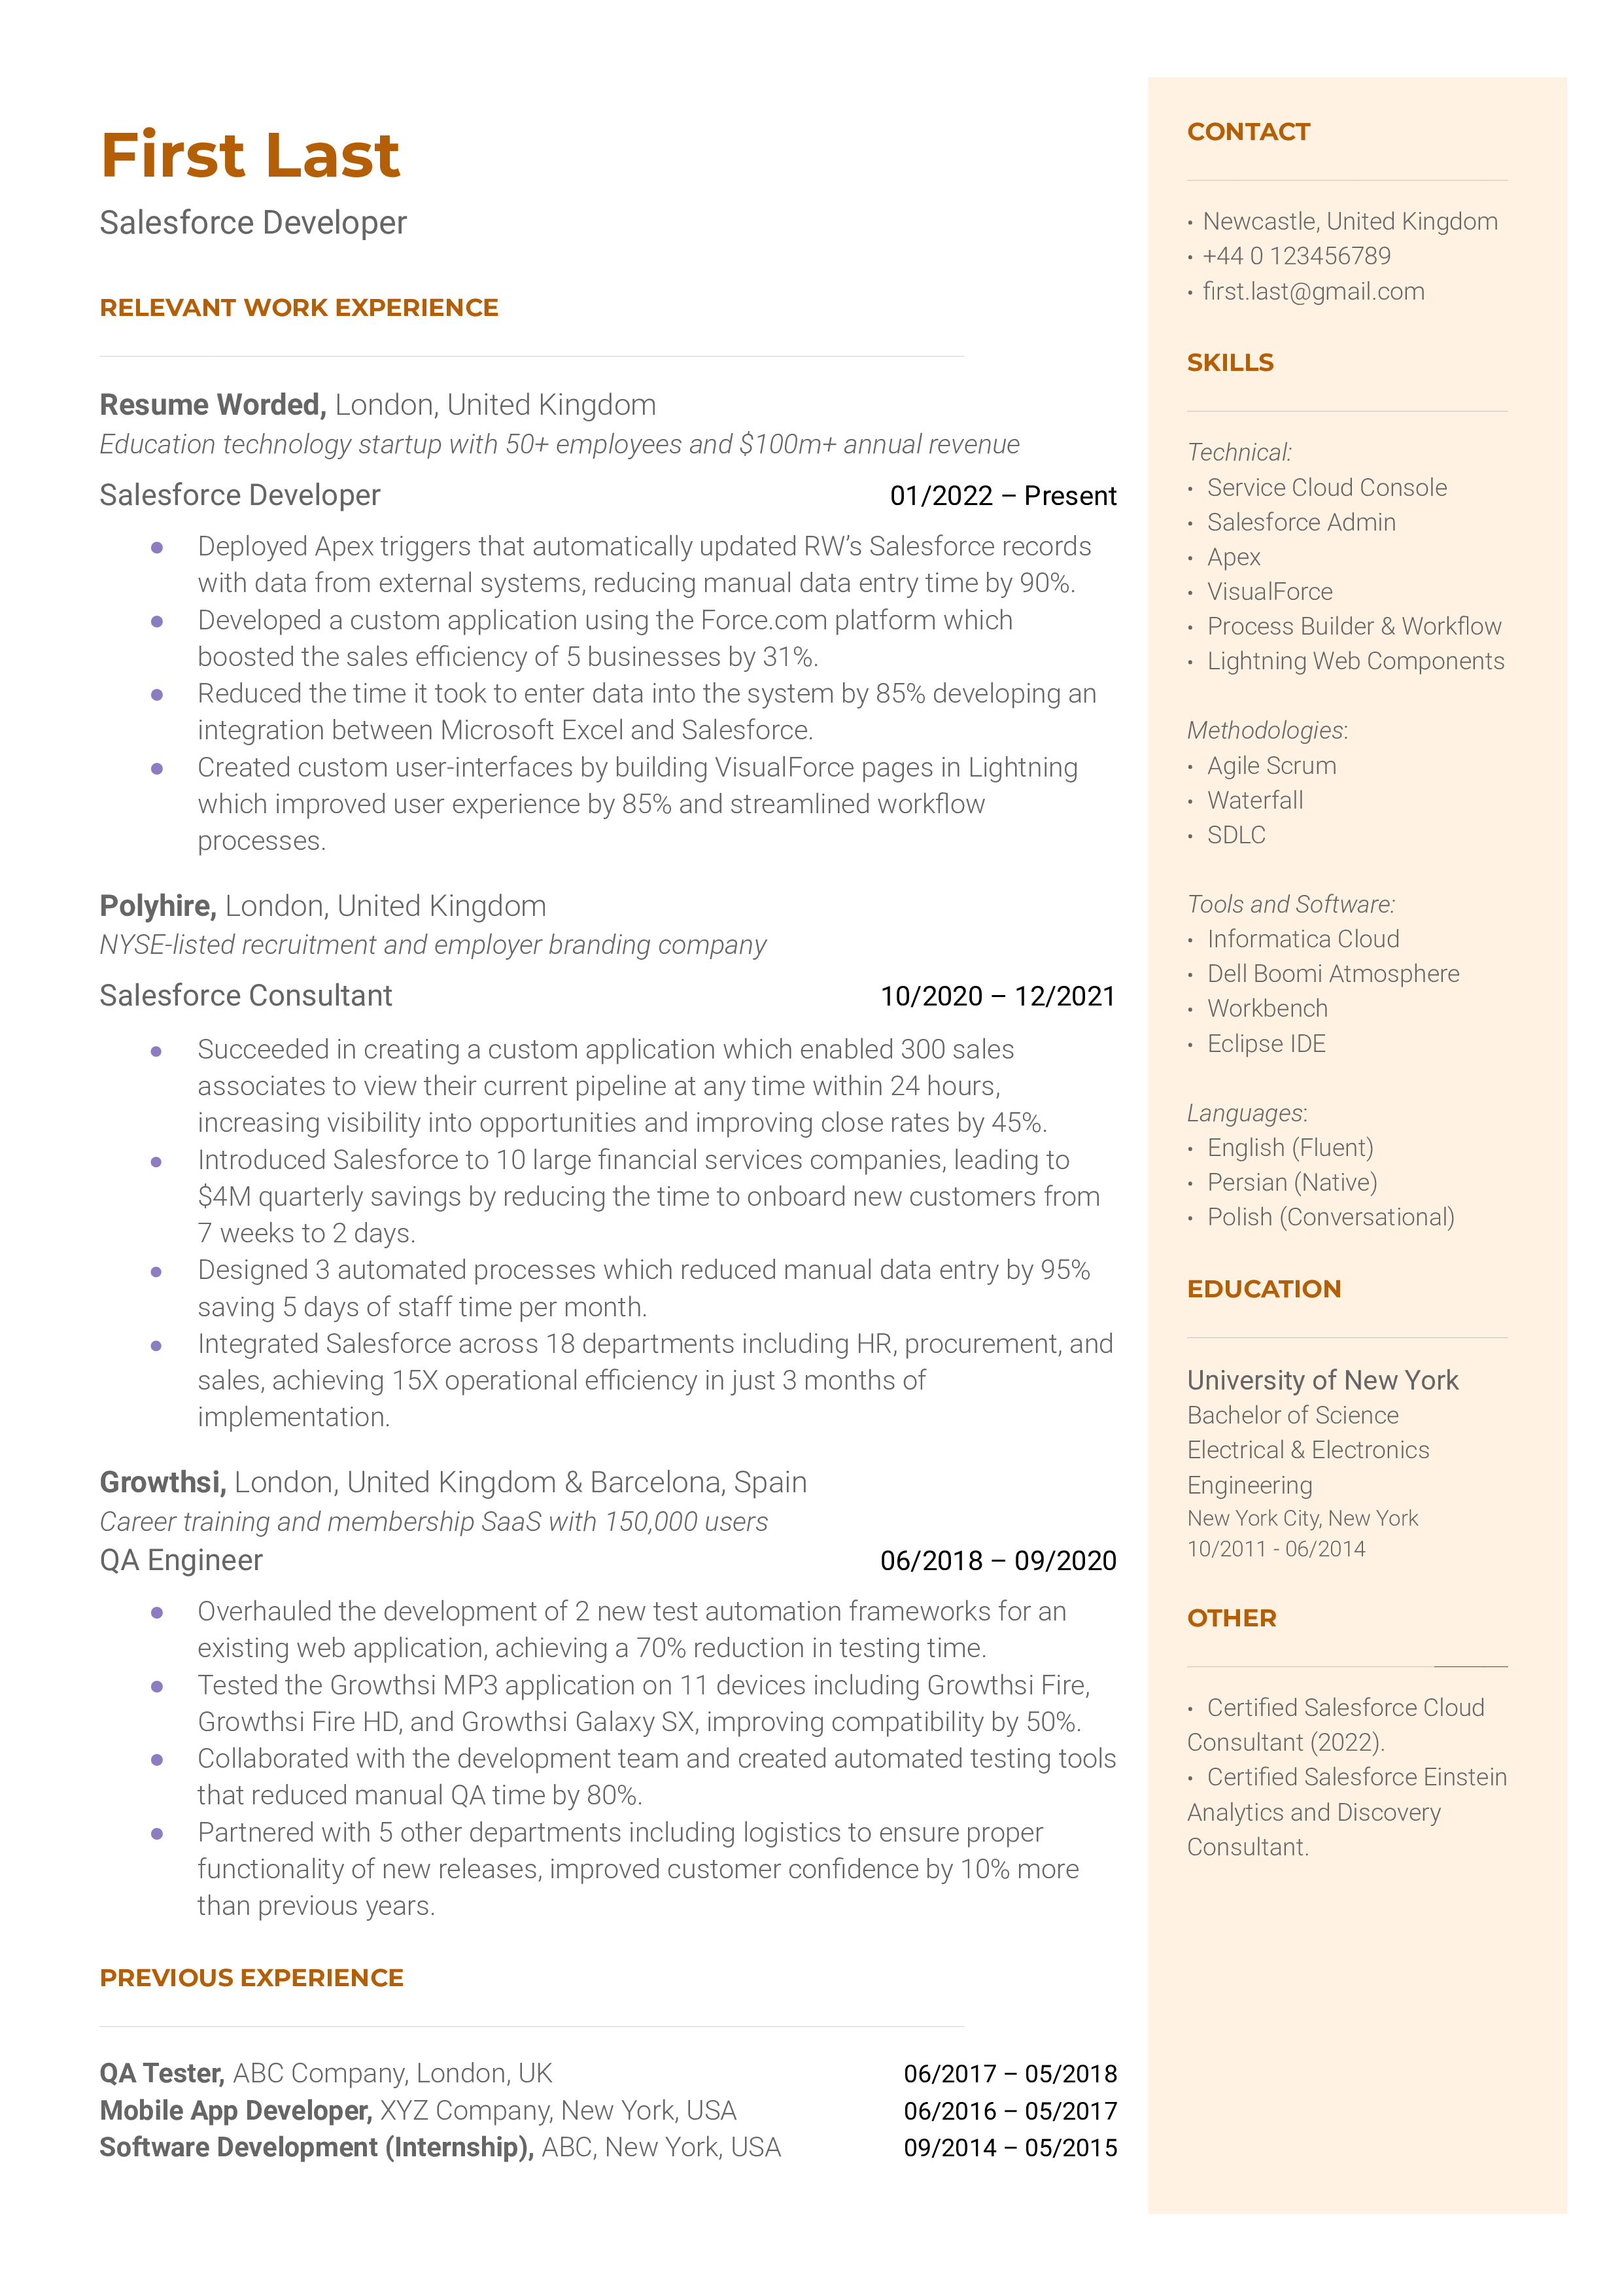 A Salesforce Developer resume template that includes education, work expeirence, skills, and contact information